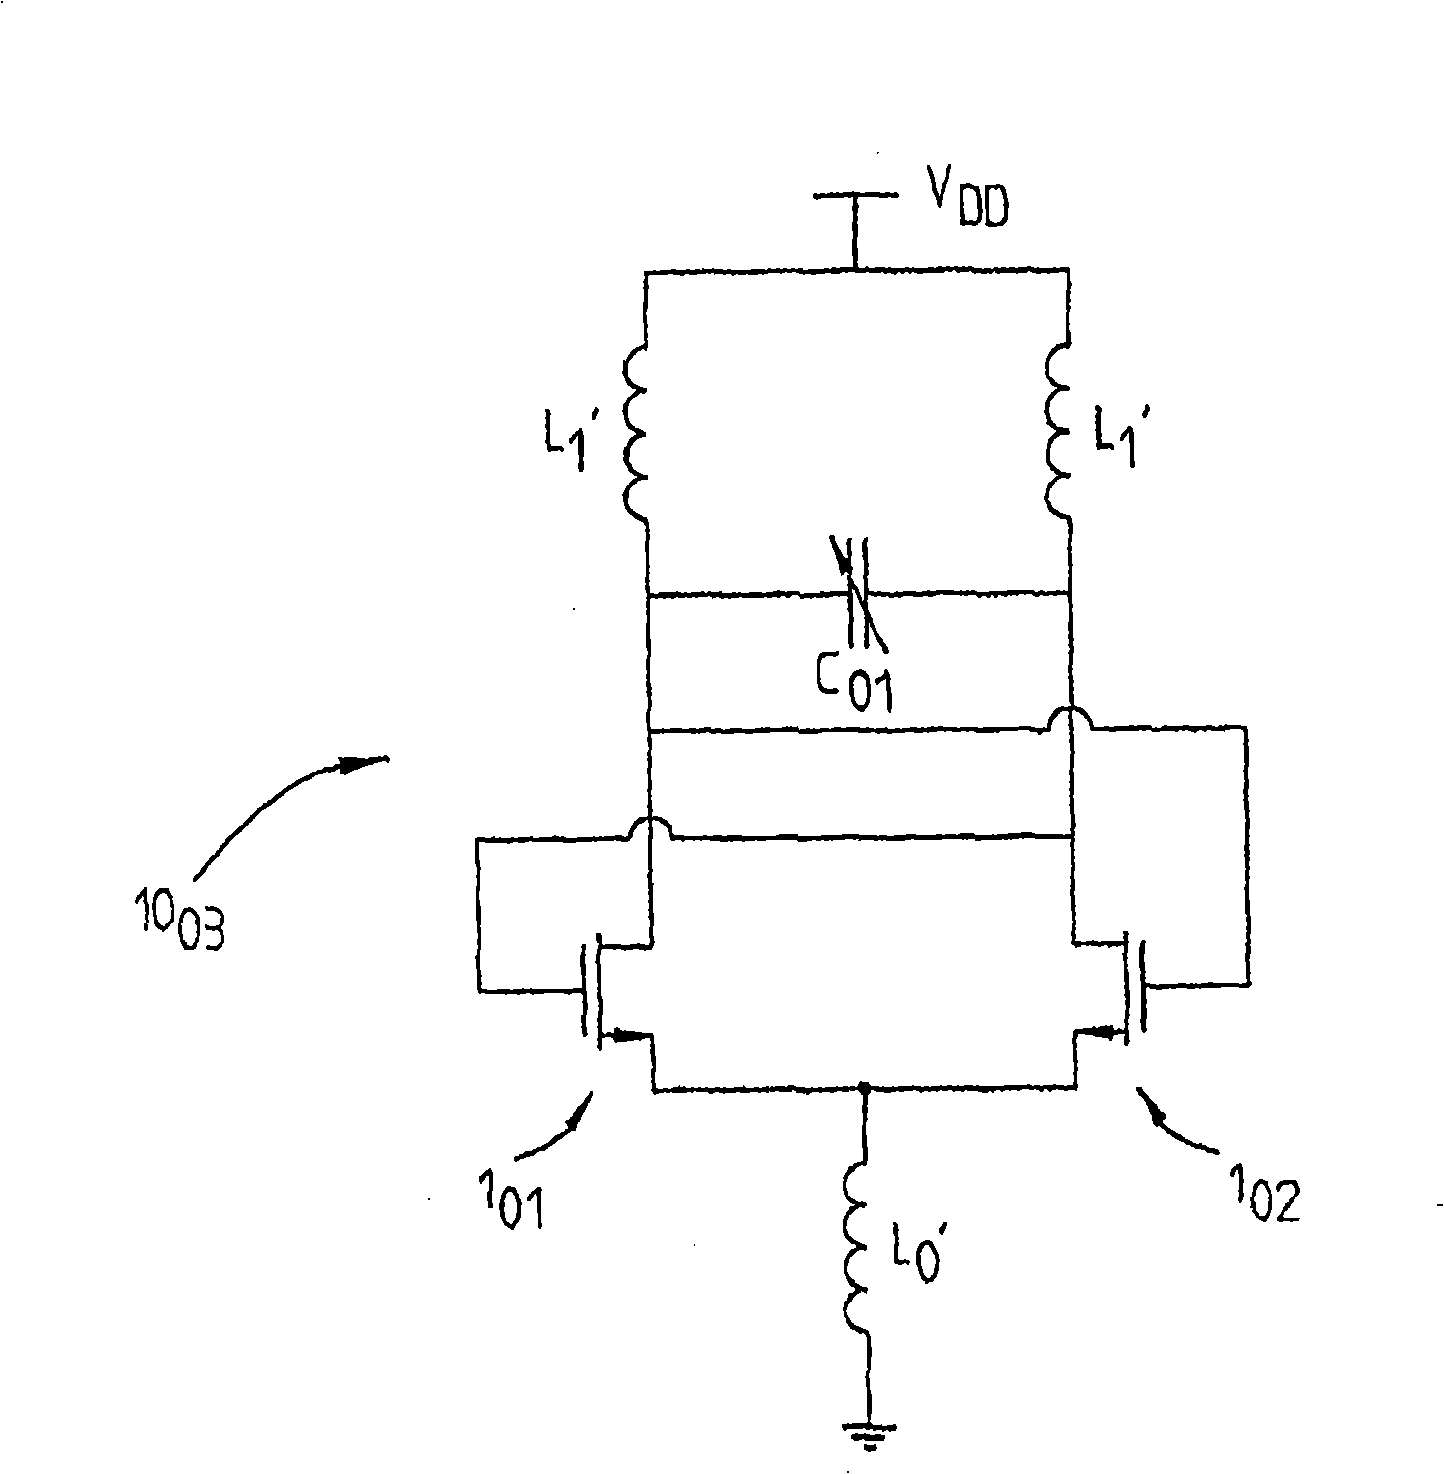 Oscillatory circuit of tunable filter with minimize phase noise